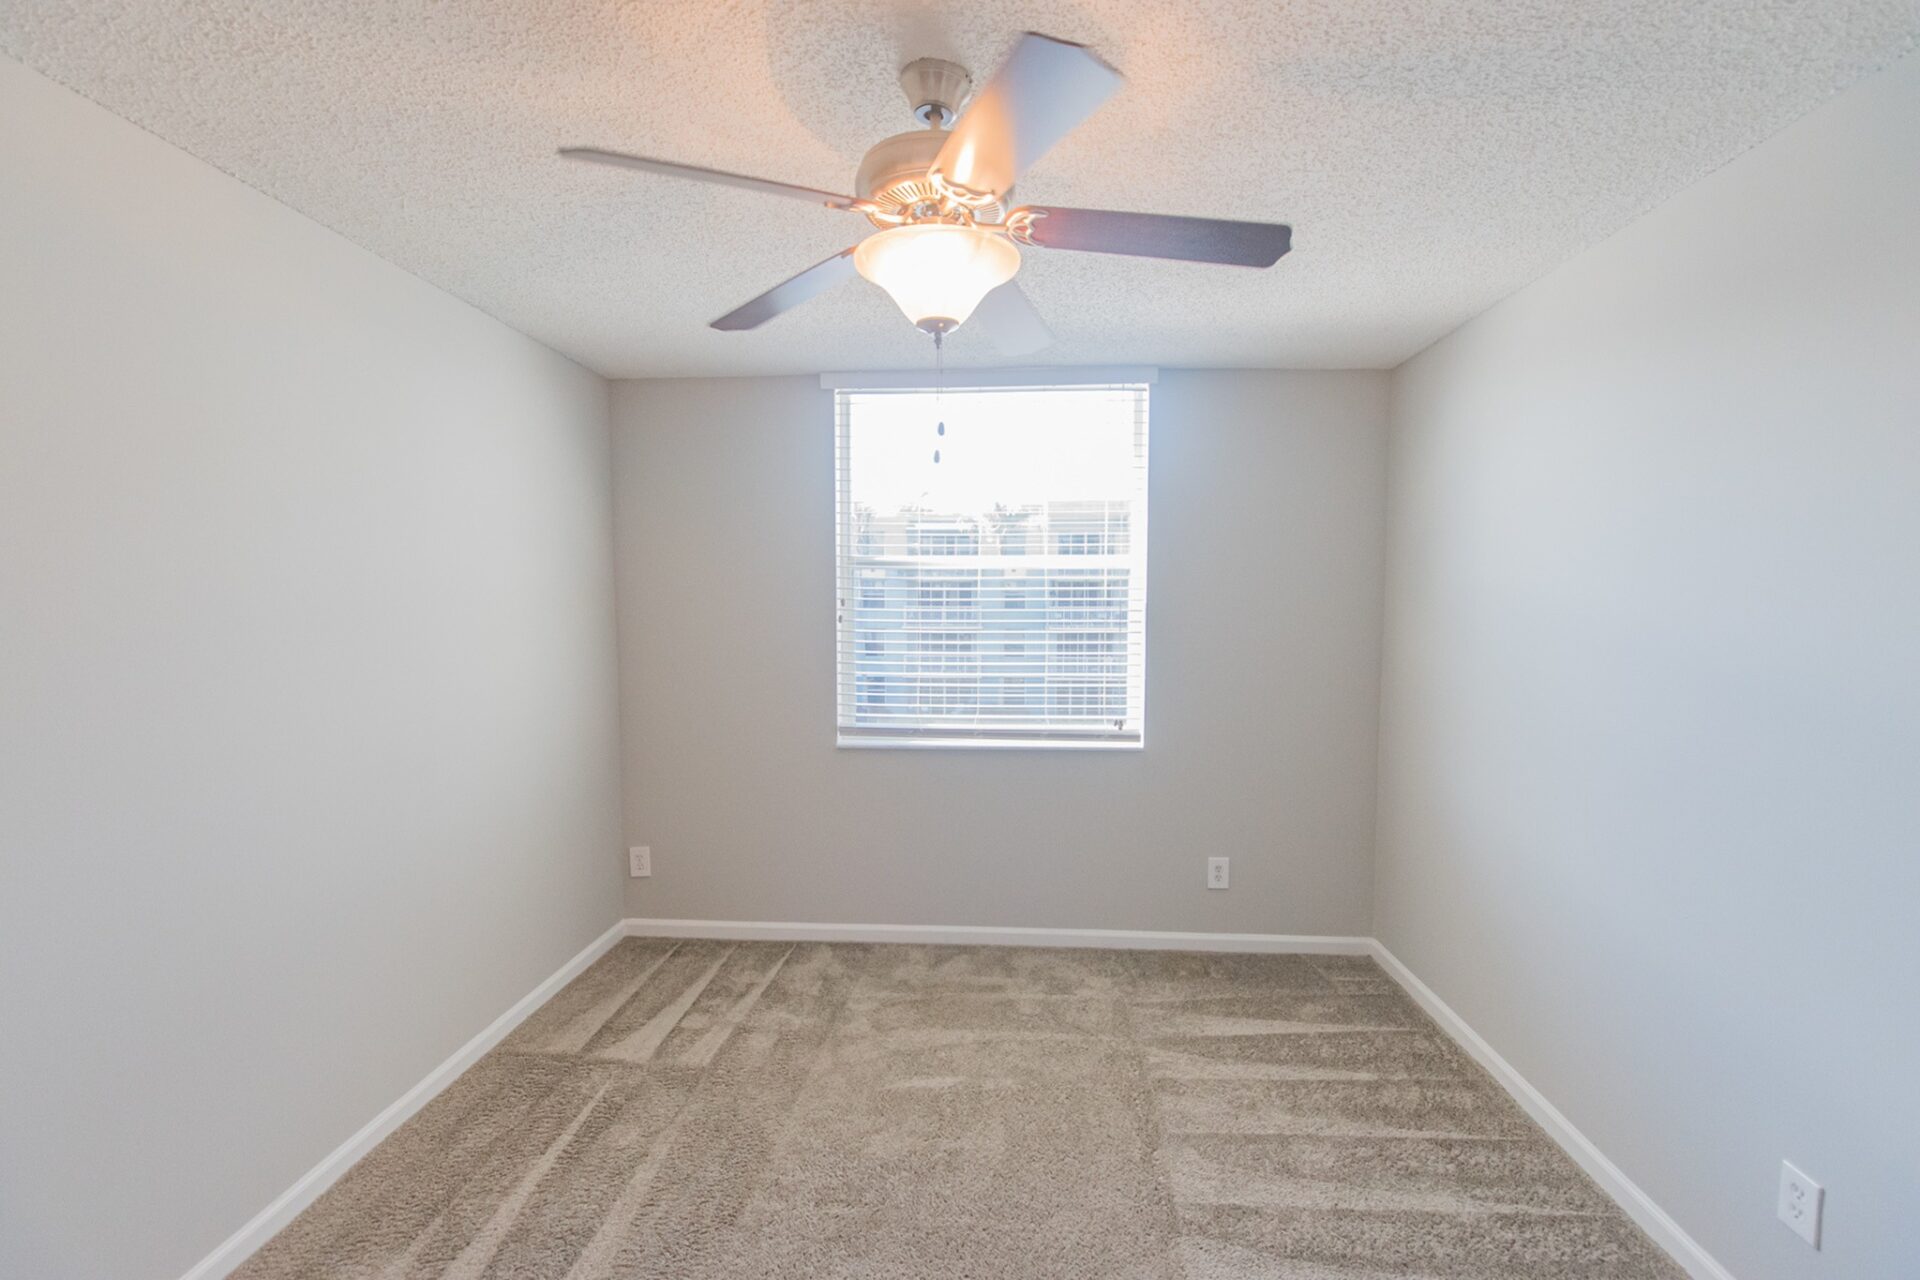 Carpeted room with a window and a ceiling fan.